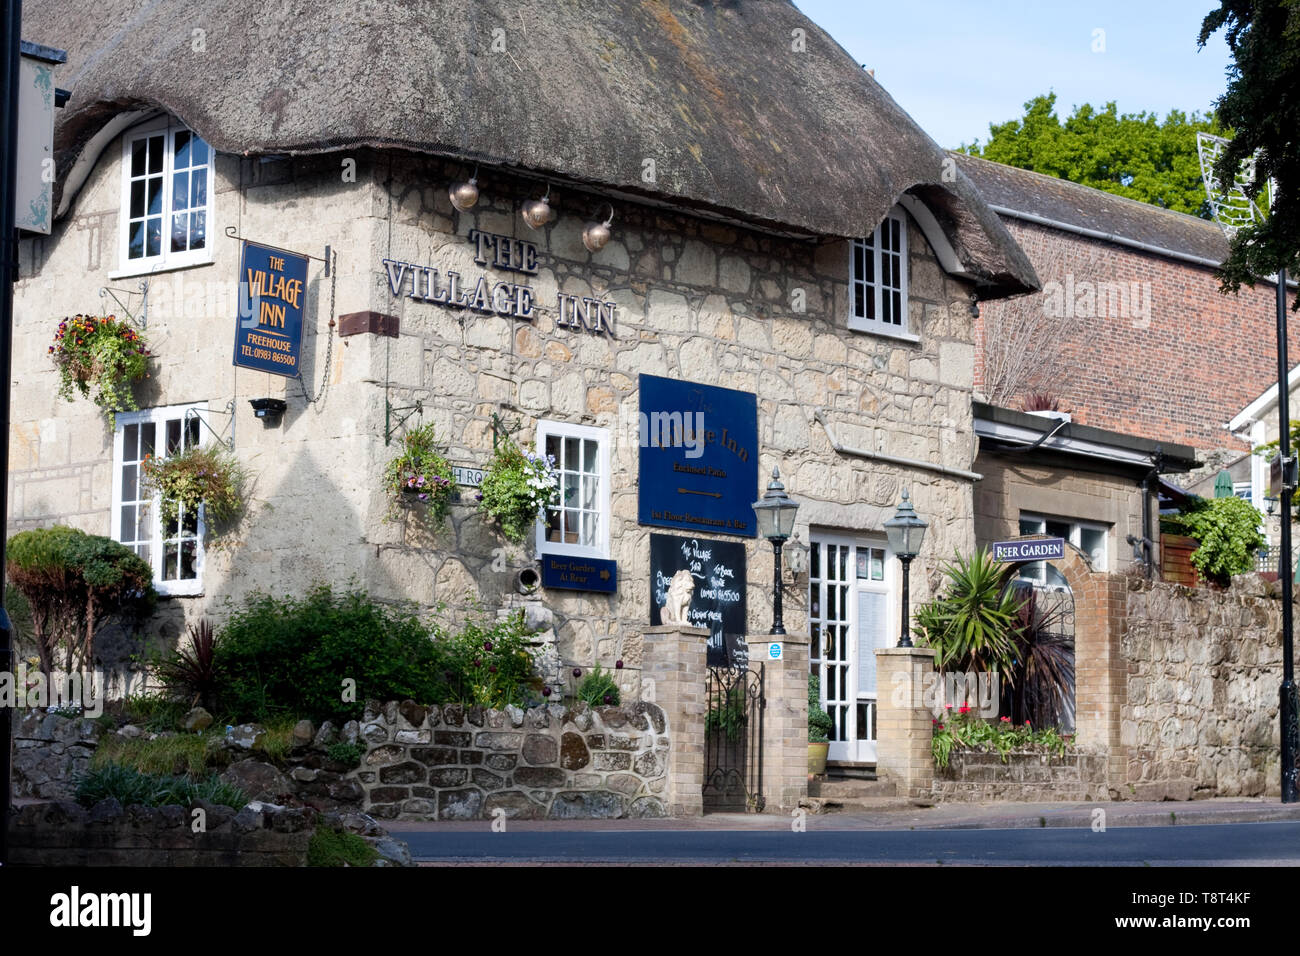 Exterior view of the Village Inn, Old Shanklin, Isle of Wight Stock Photo